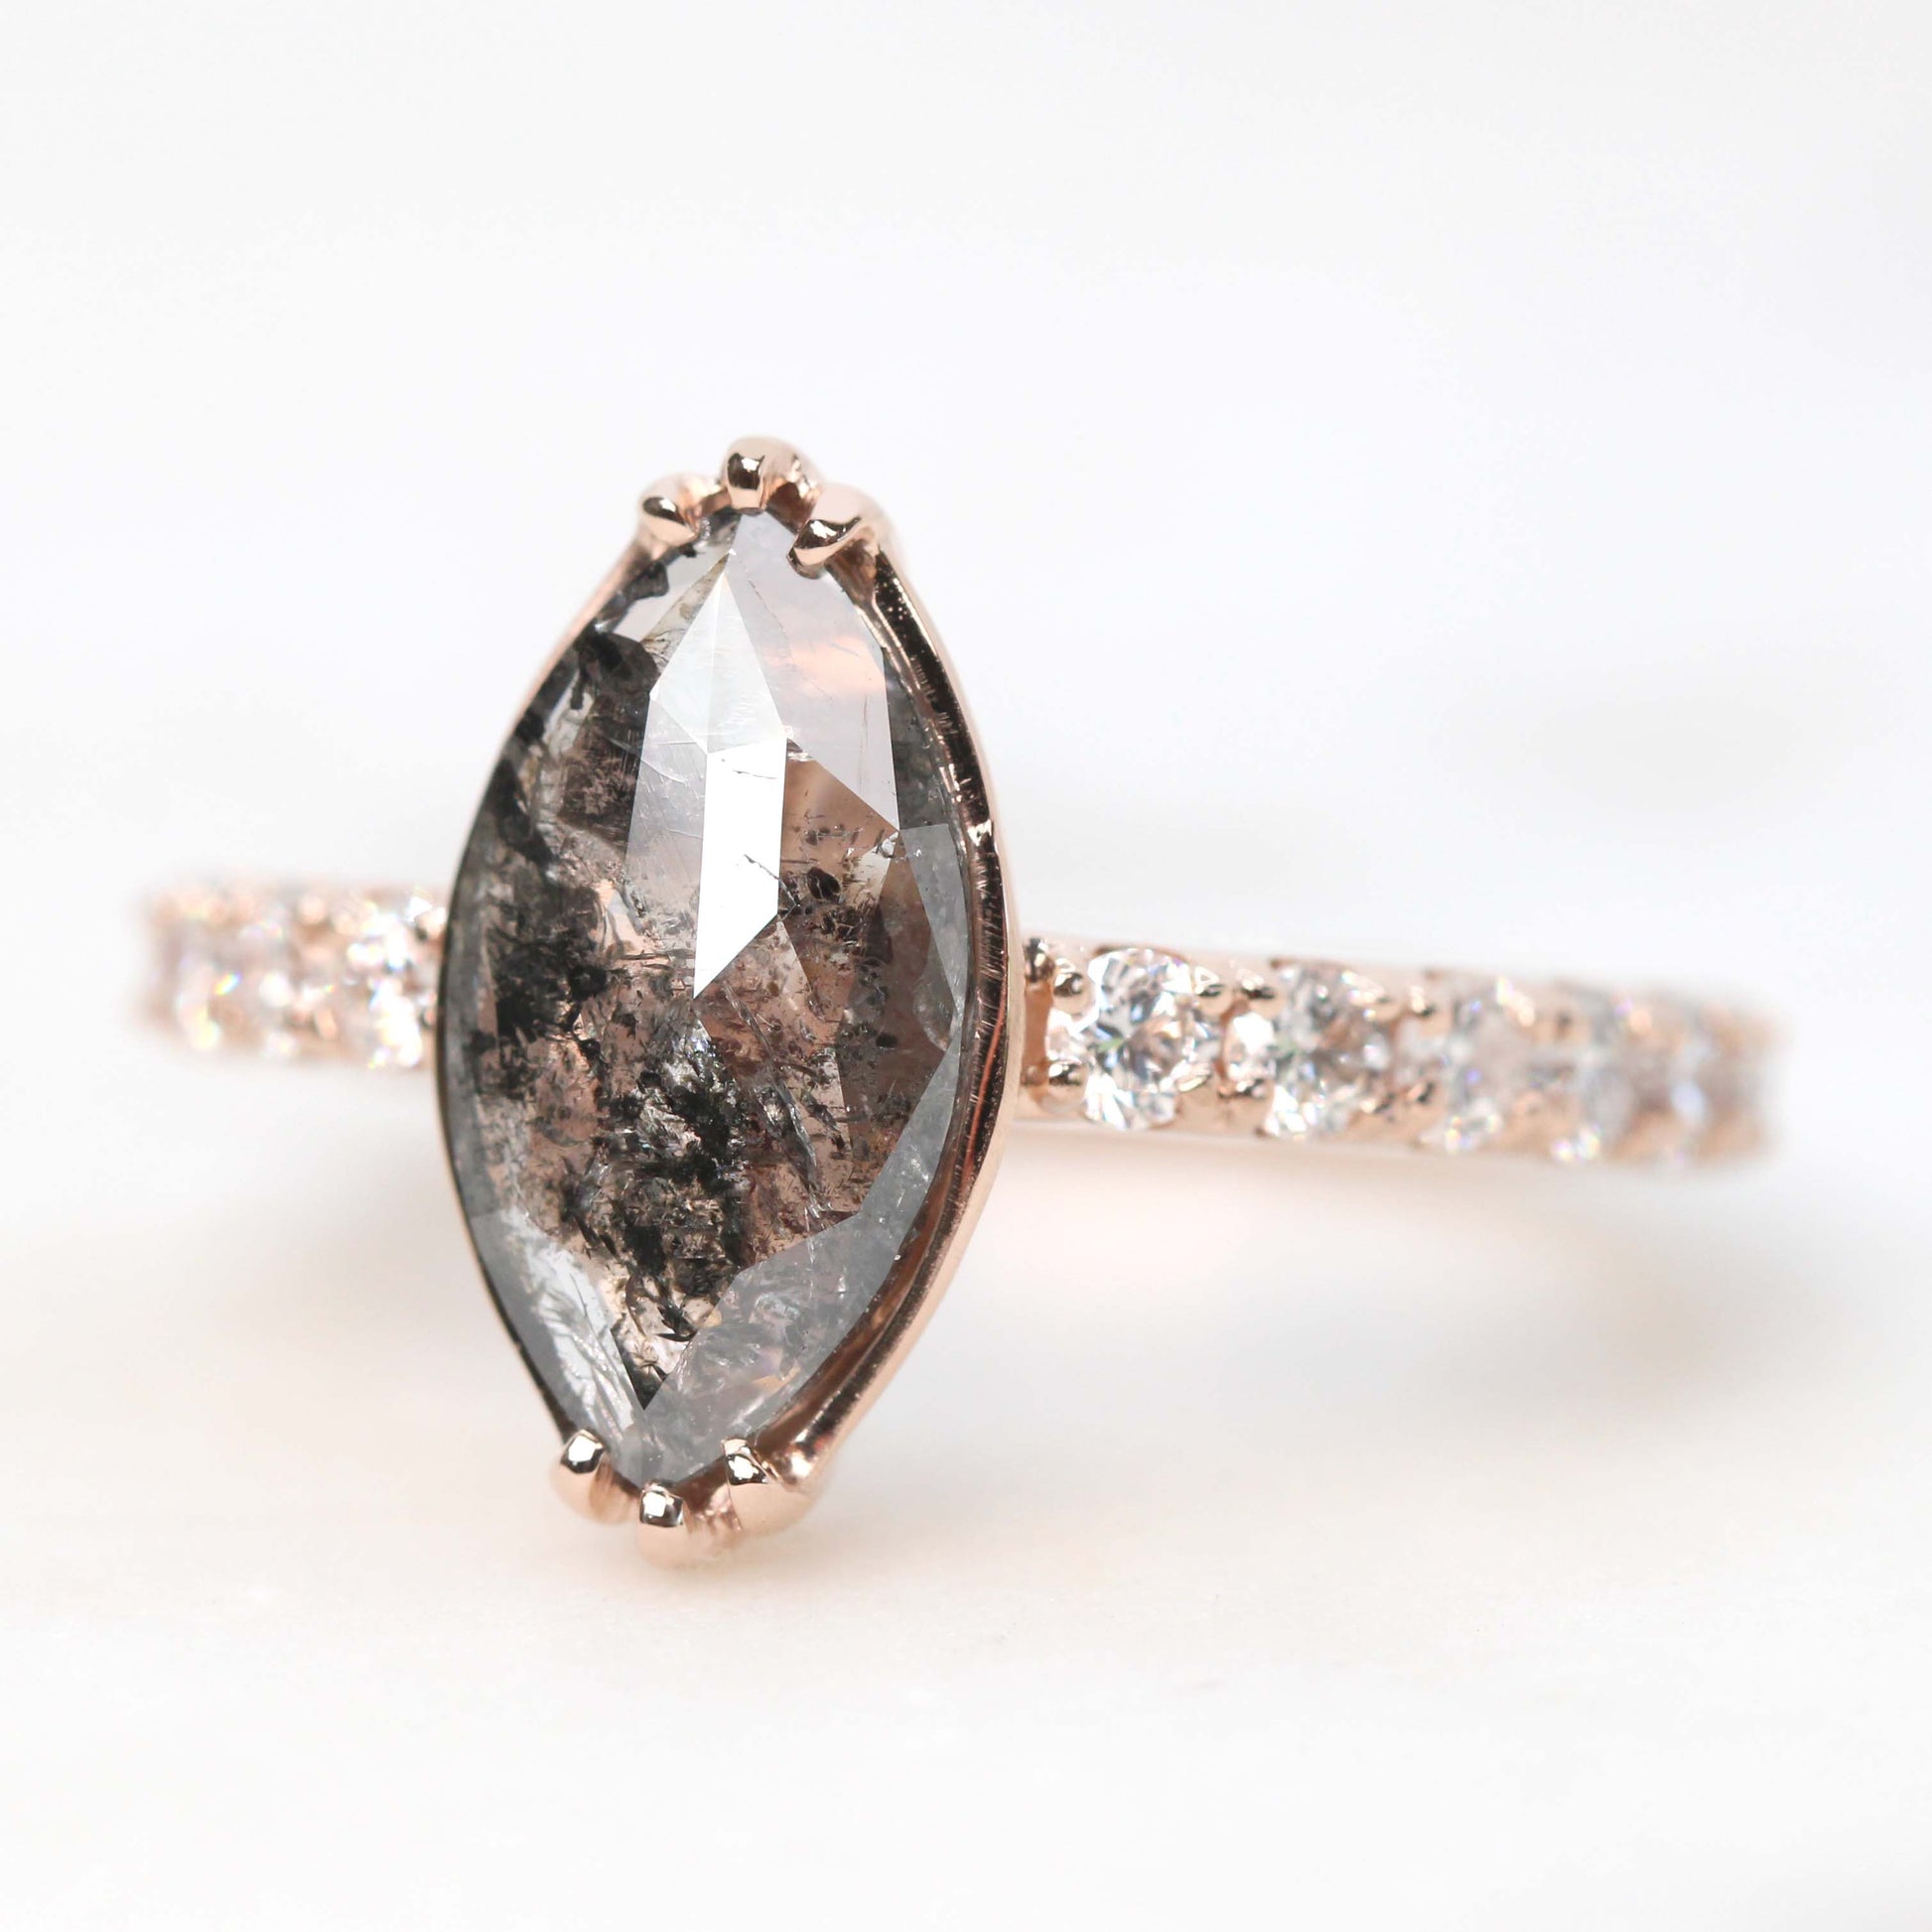 Alice Ring with a 1.92 Carat Dark and Clear Marquise Celestial Diamond and White Accent Diamonds in 14k Rose Gold - Ready to Size and Ship - Midwinter Co. Alternative Bridal Rings and Modern Fine Jewelry